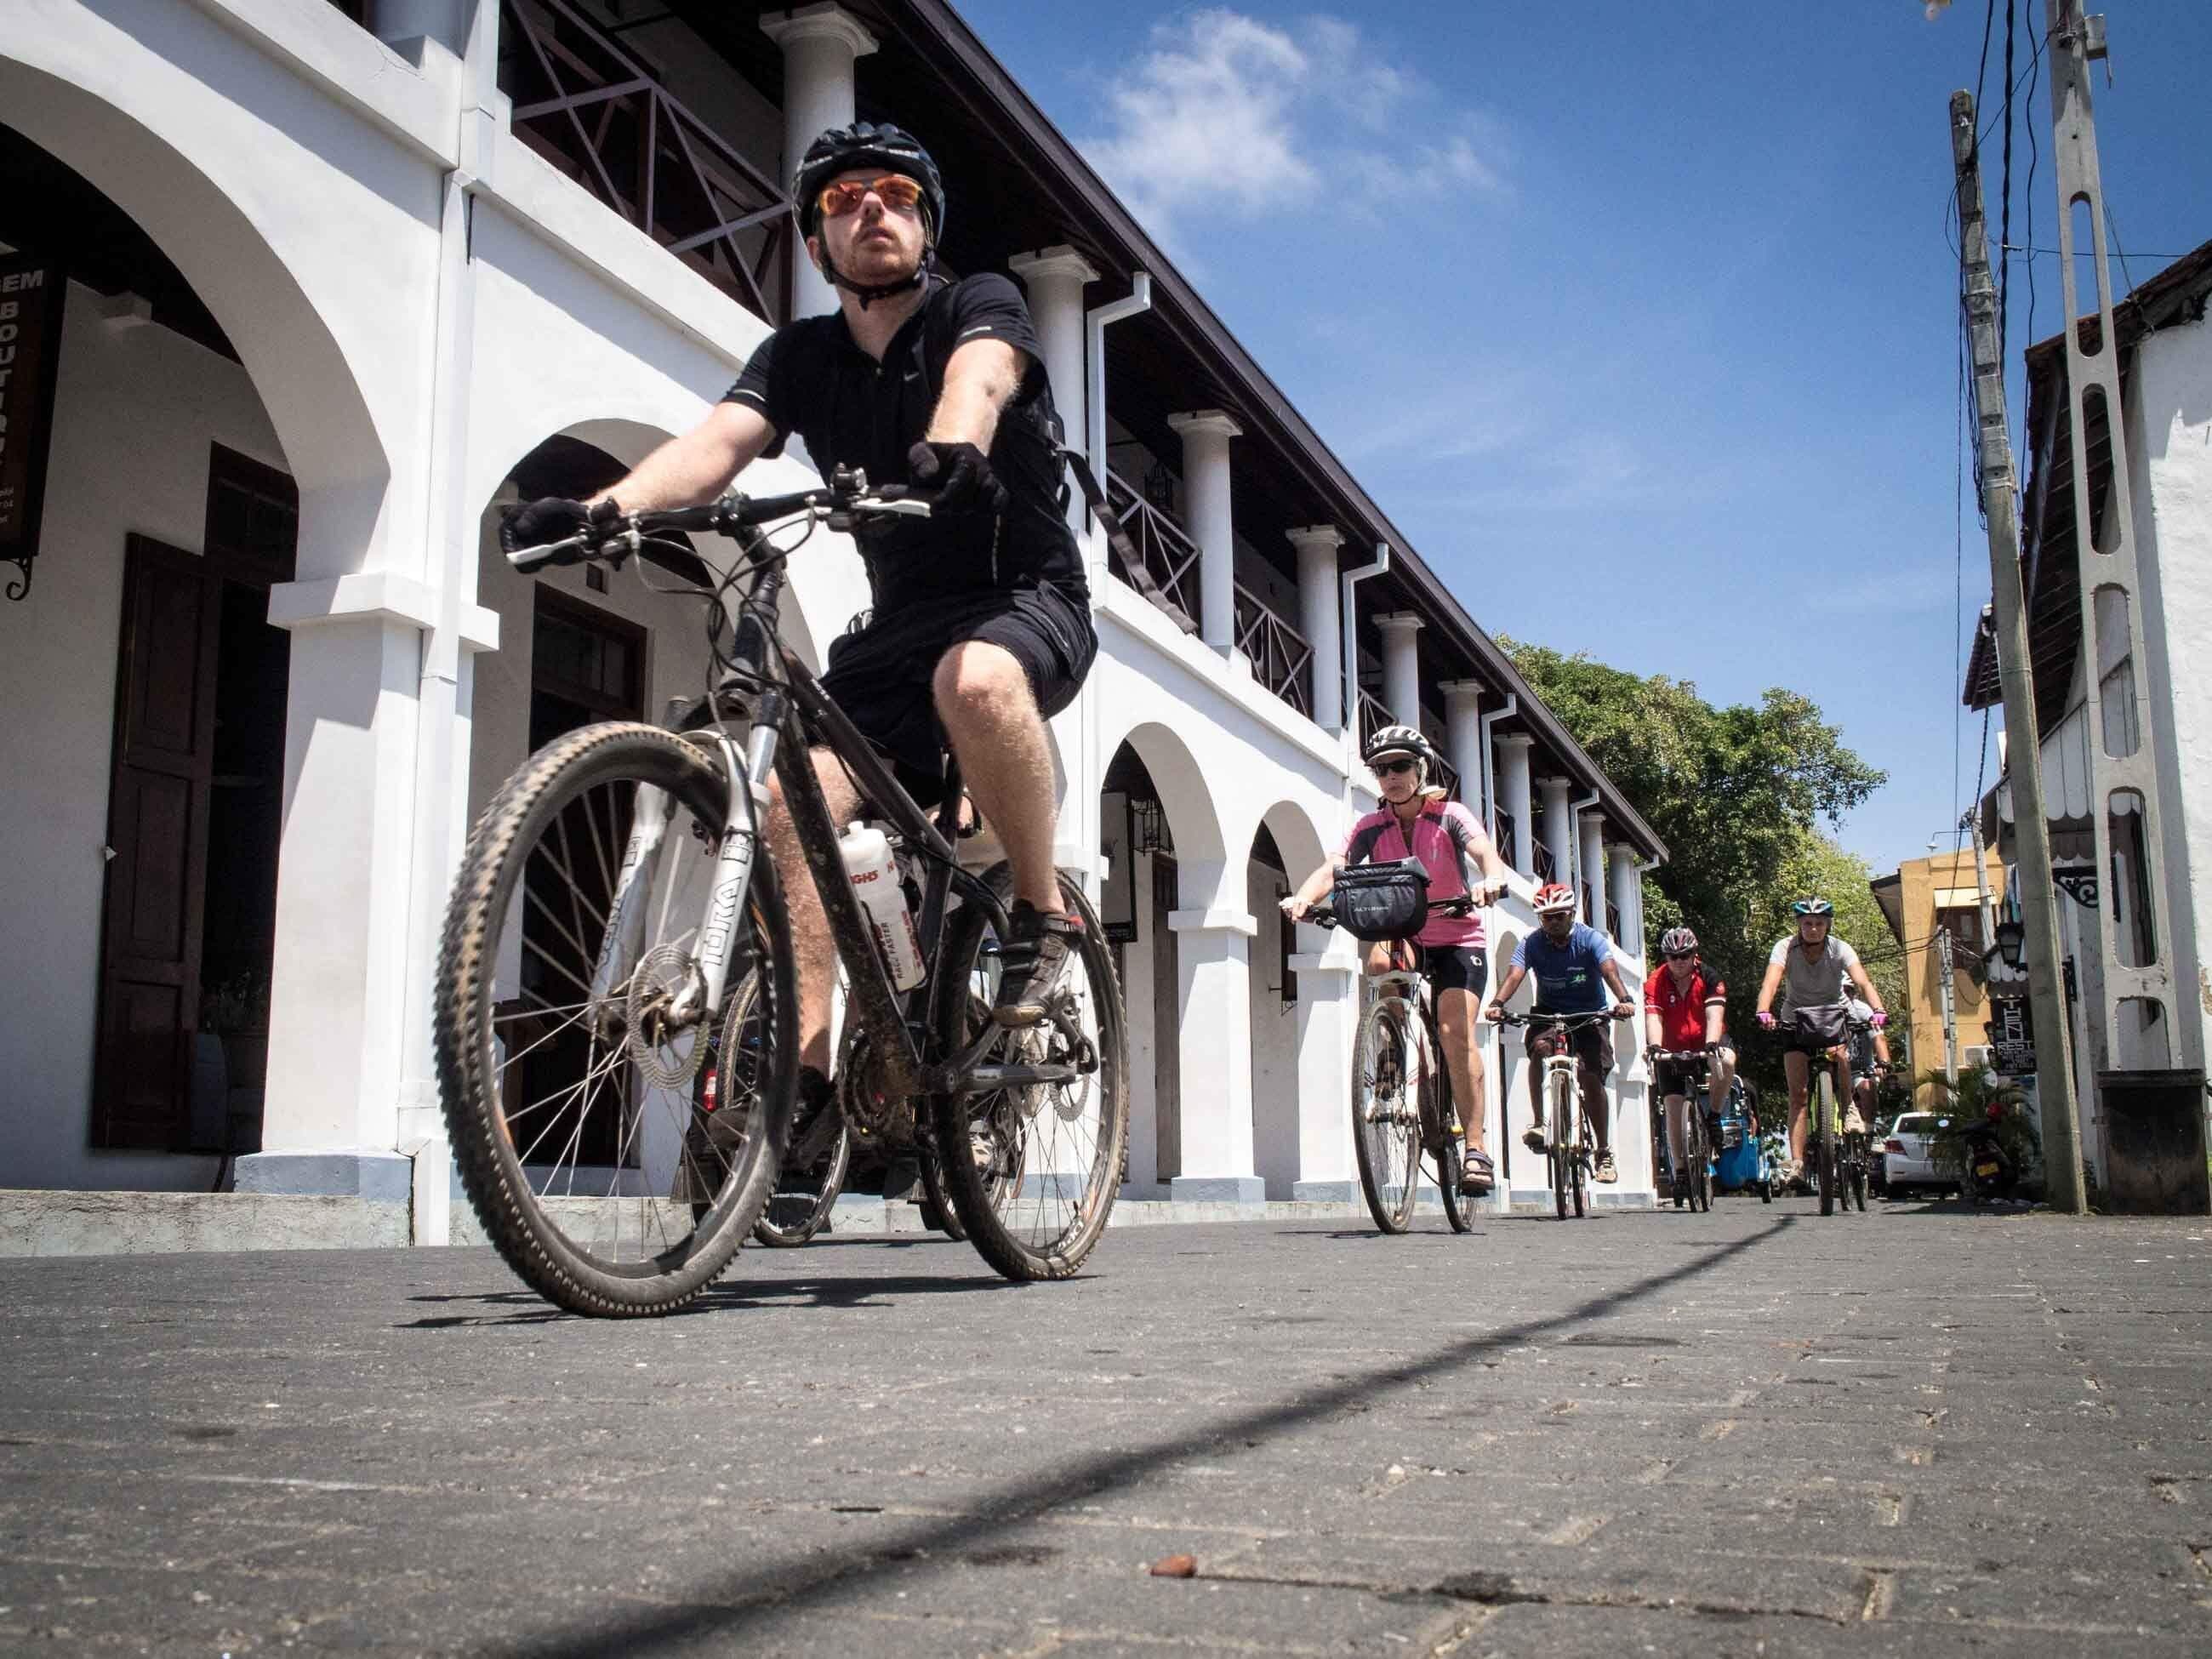 Some Cyclists ride through Galle fort city in Sri Lanka